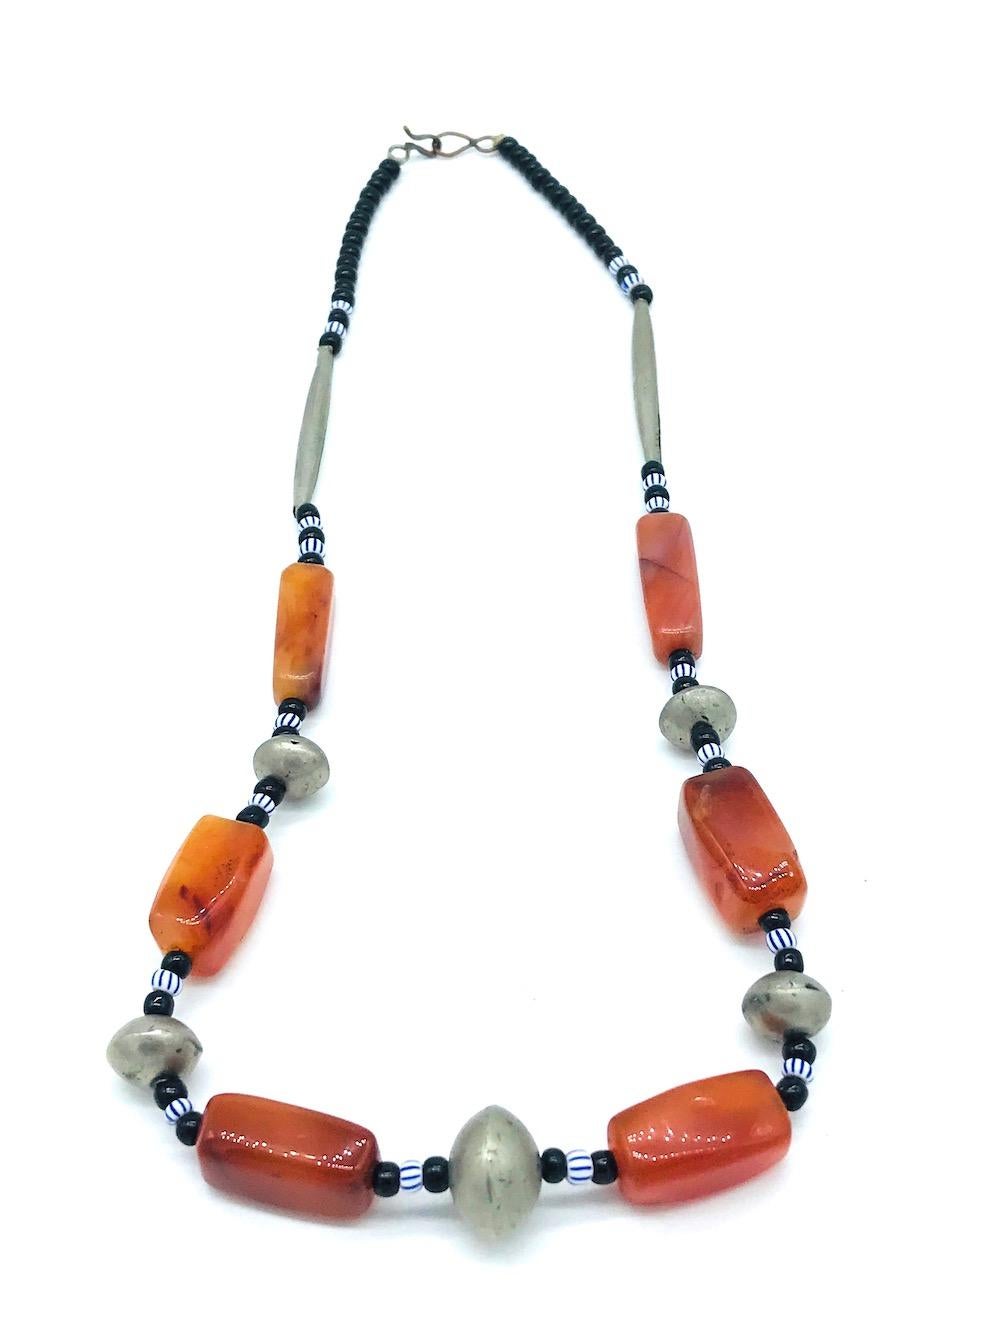 Rare Mali Africa, Orange Bead Hand Painted Necklace In Good Condition For Sale In Aliso Viejo, CA